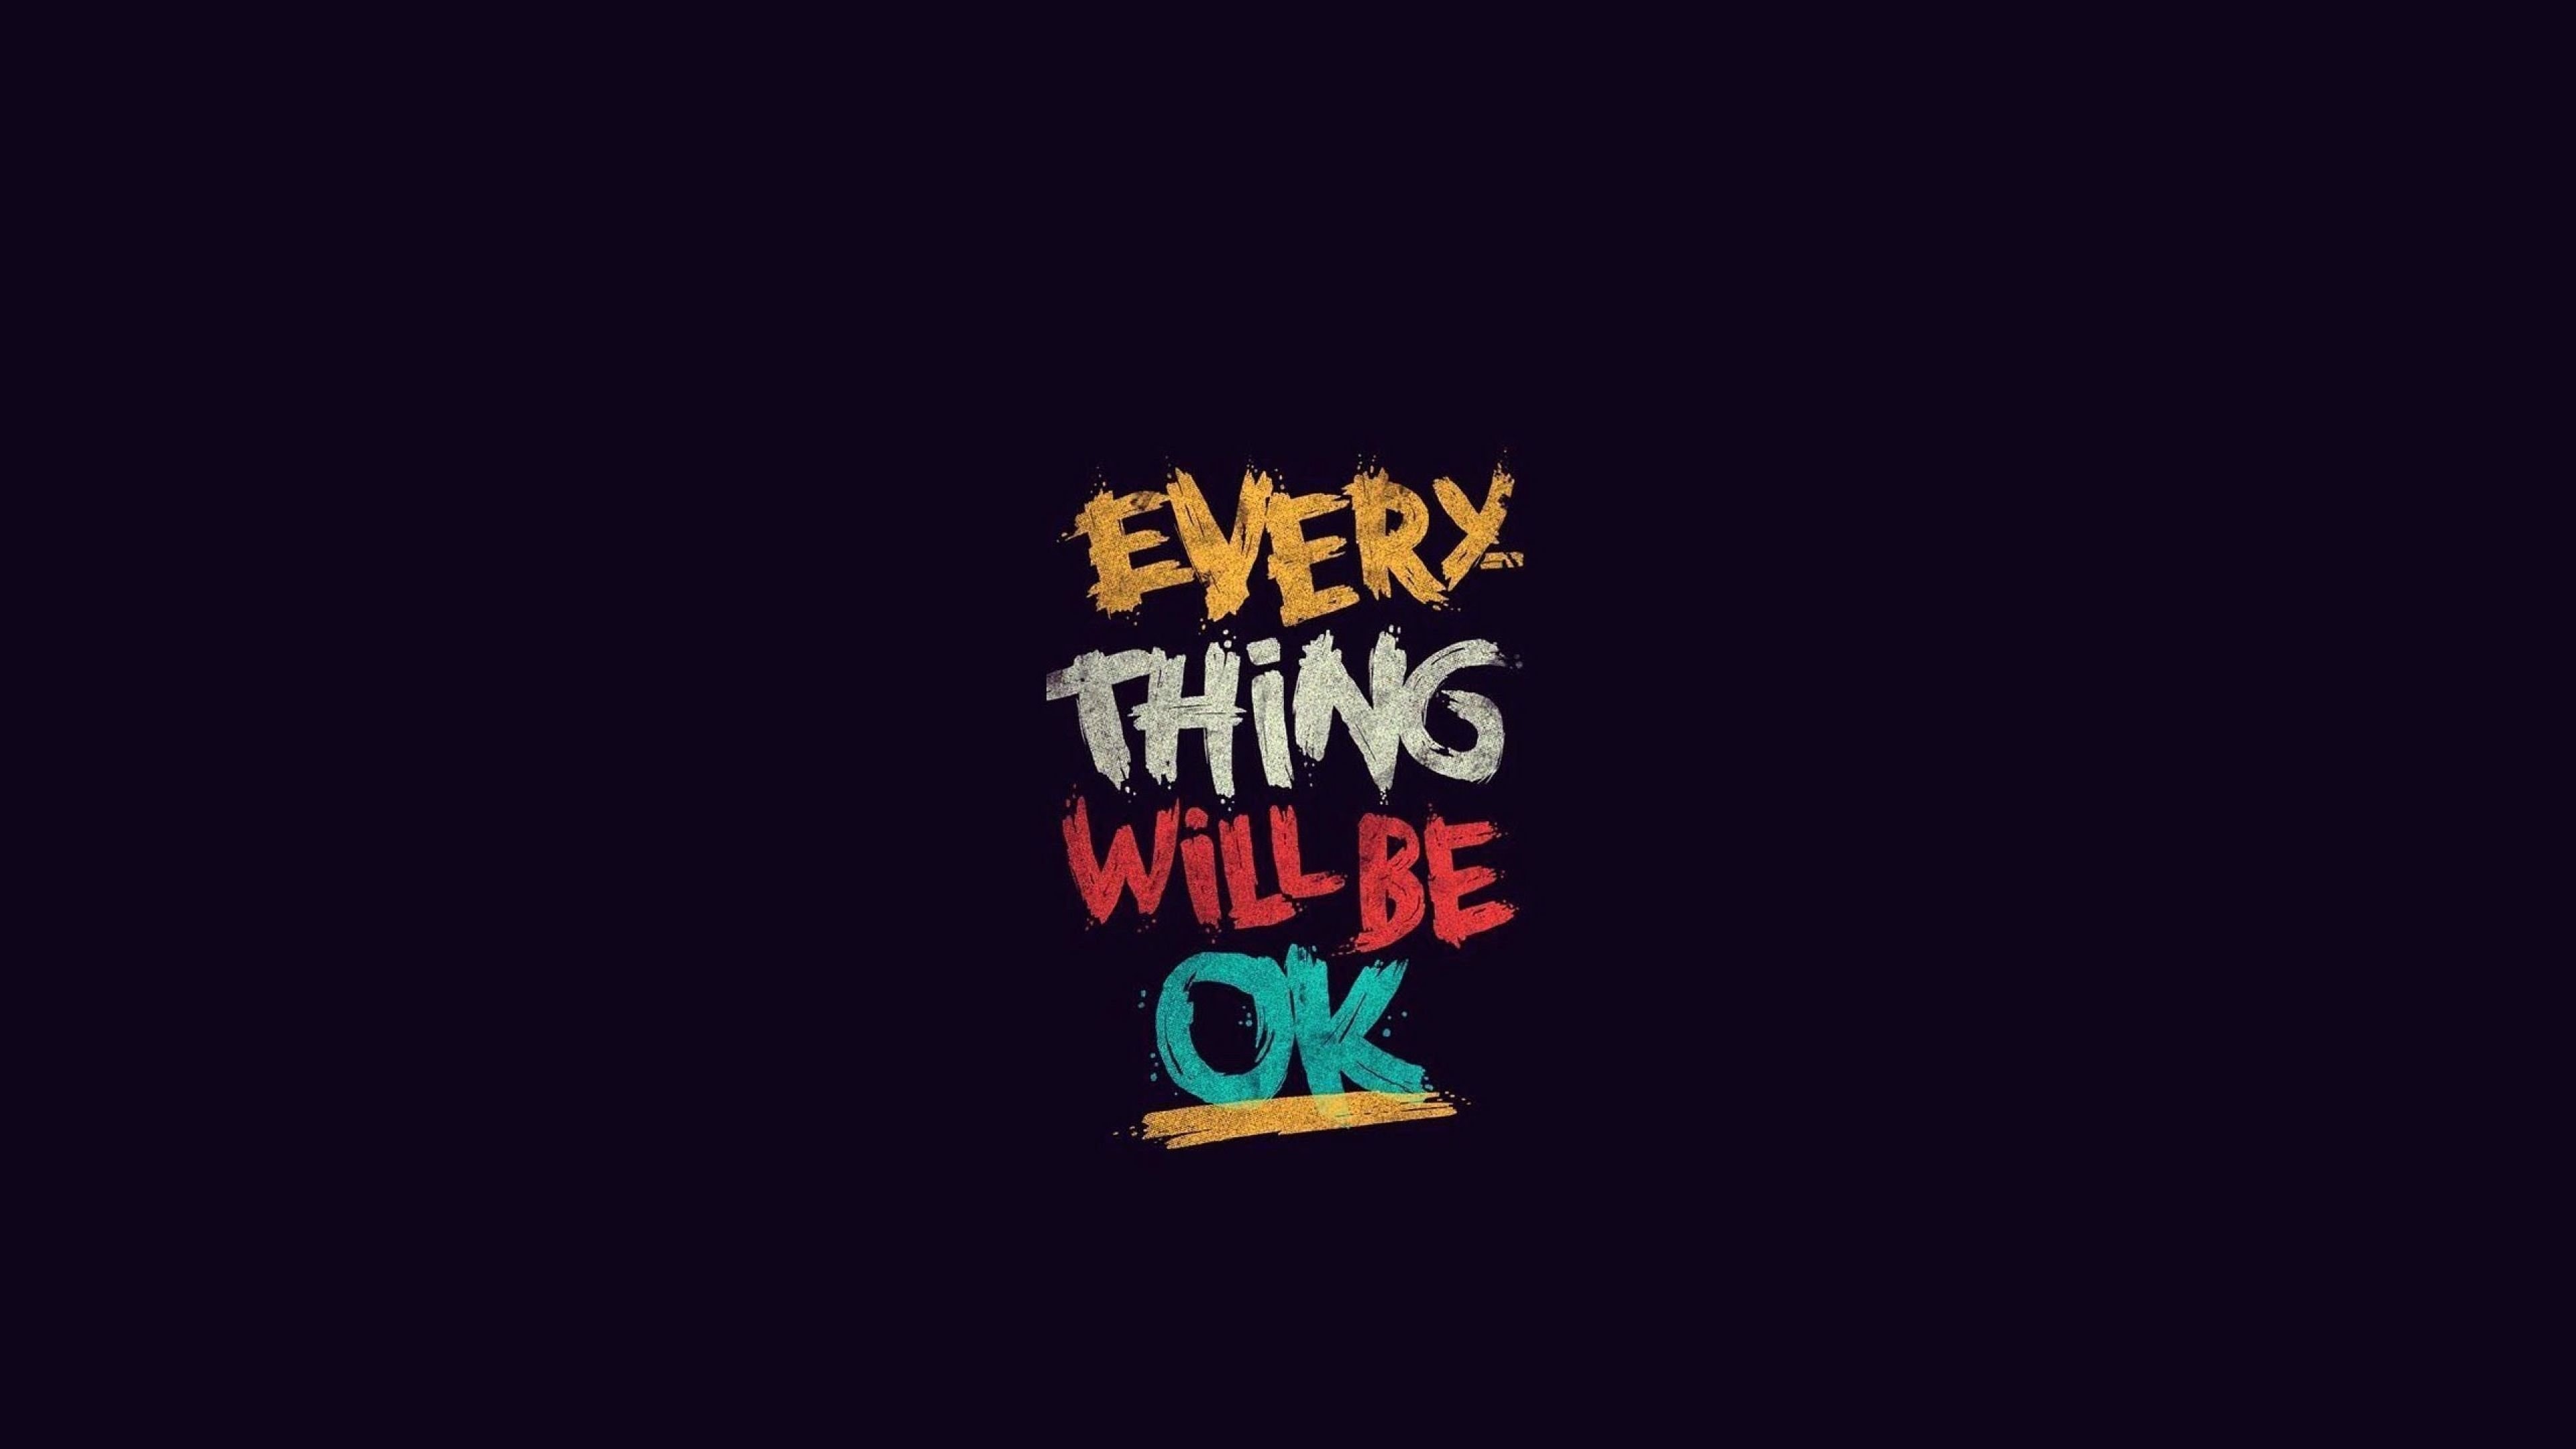 3840x2160 Everything will be OK 4K Wallpaper, HD Inspirational & Quotes 4K Wallpapers, Image, Photos and Backgrounds